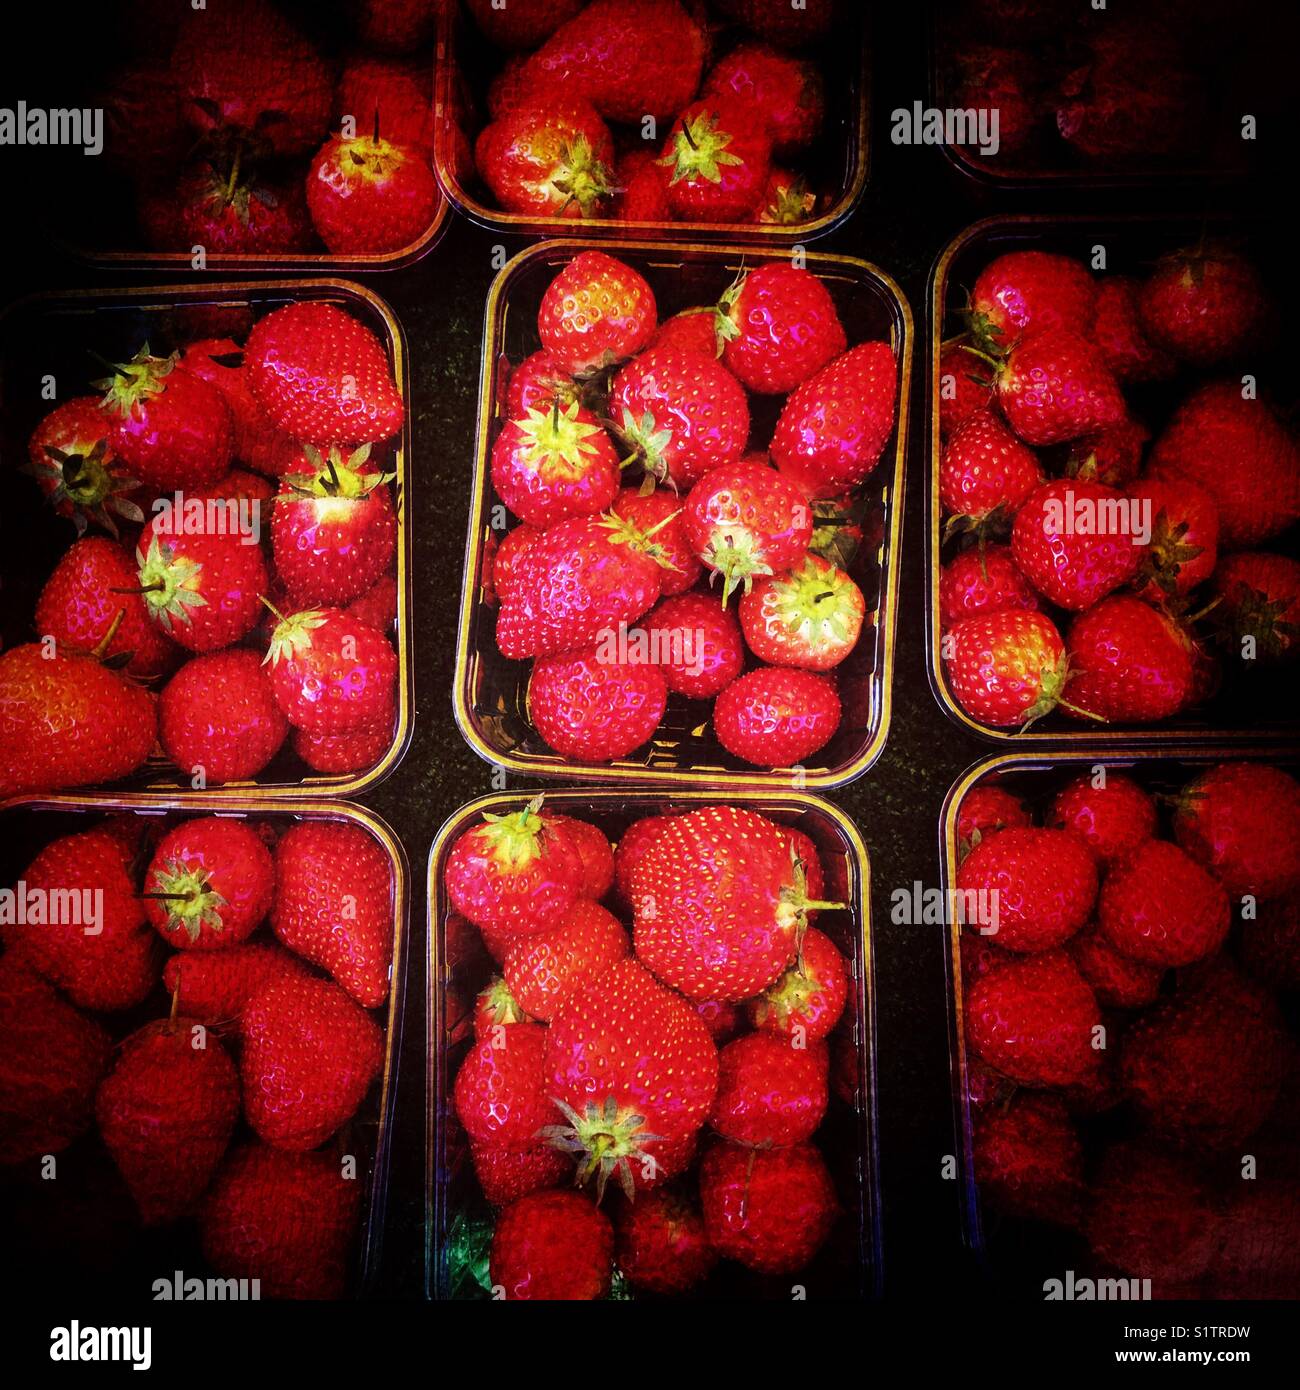 Punnets of scrumptious red strawberries Stock Photo